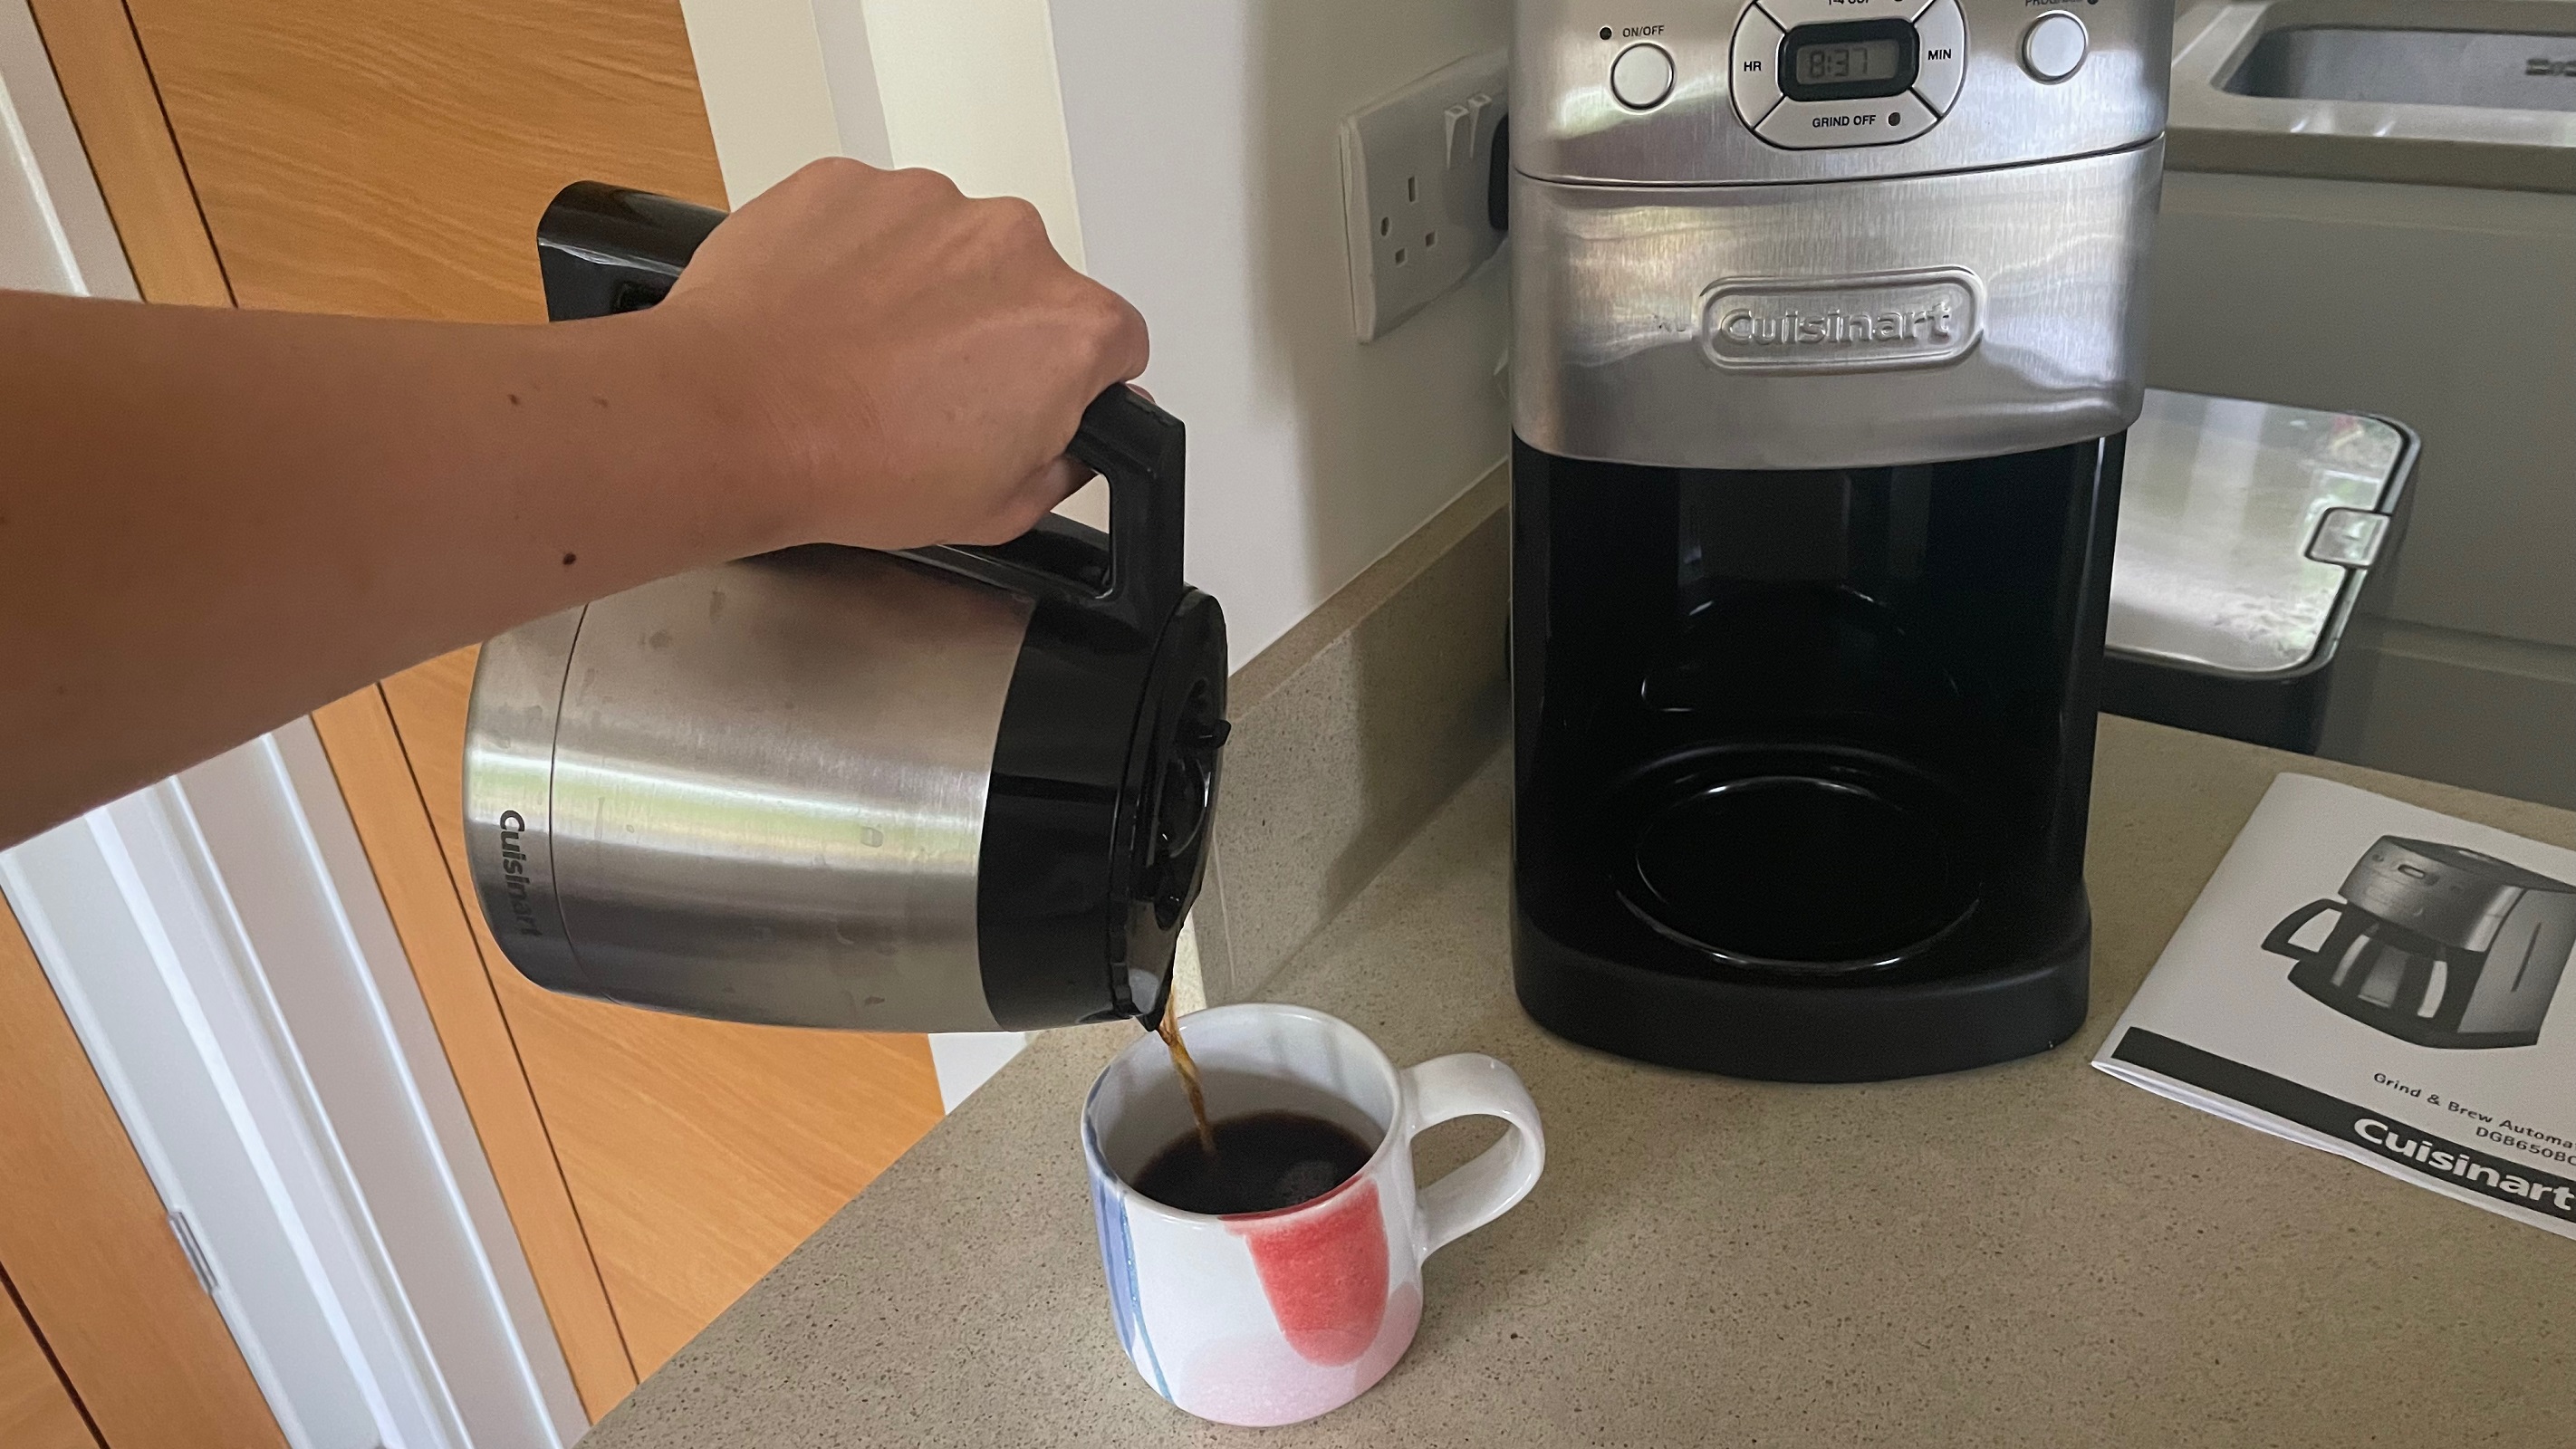 pouring just the right amount of coffee from the Cuisinart carafe